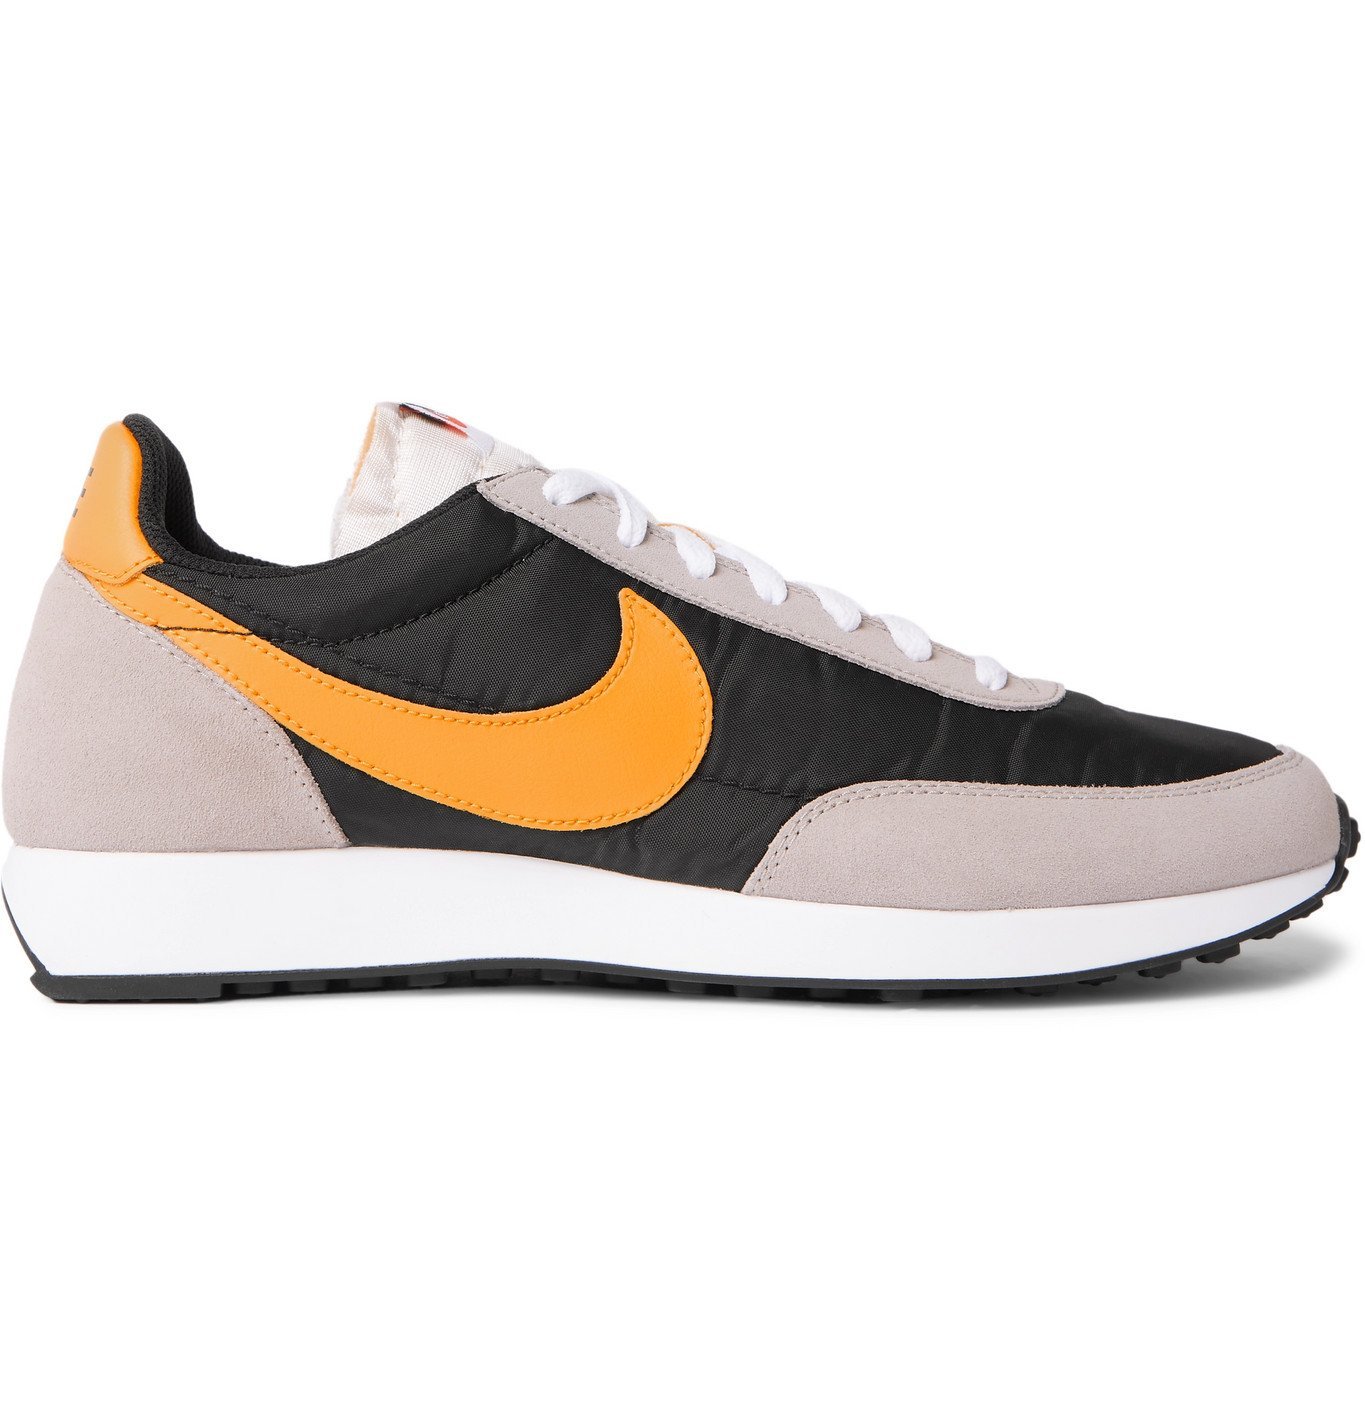 NIKE - Air Tailwind 79 Shell, Suede and Leather Sneakers - Black Nike